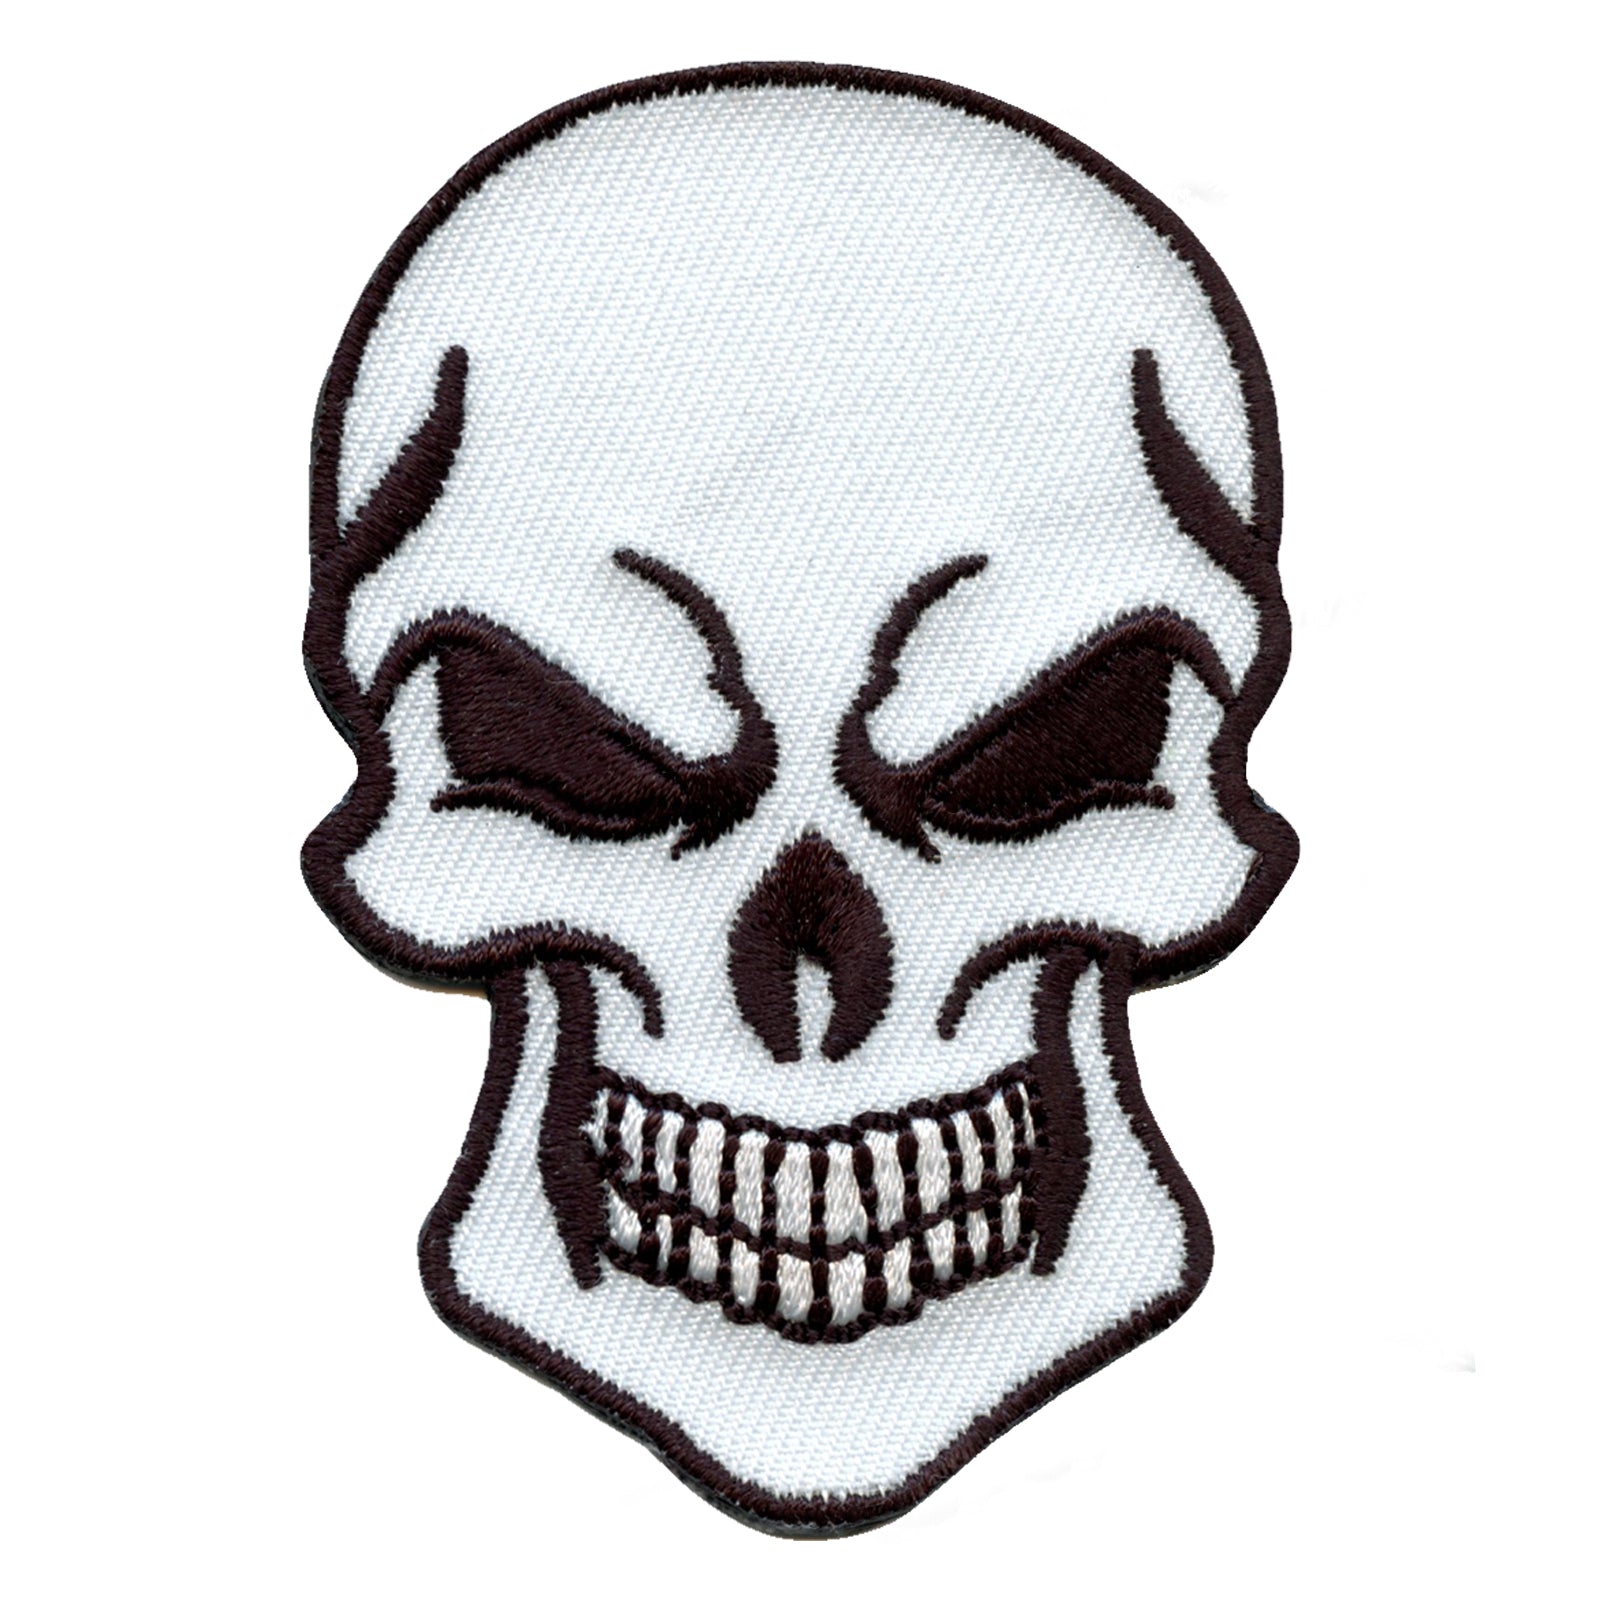 Buy Skull Embroidery Patches